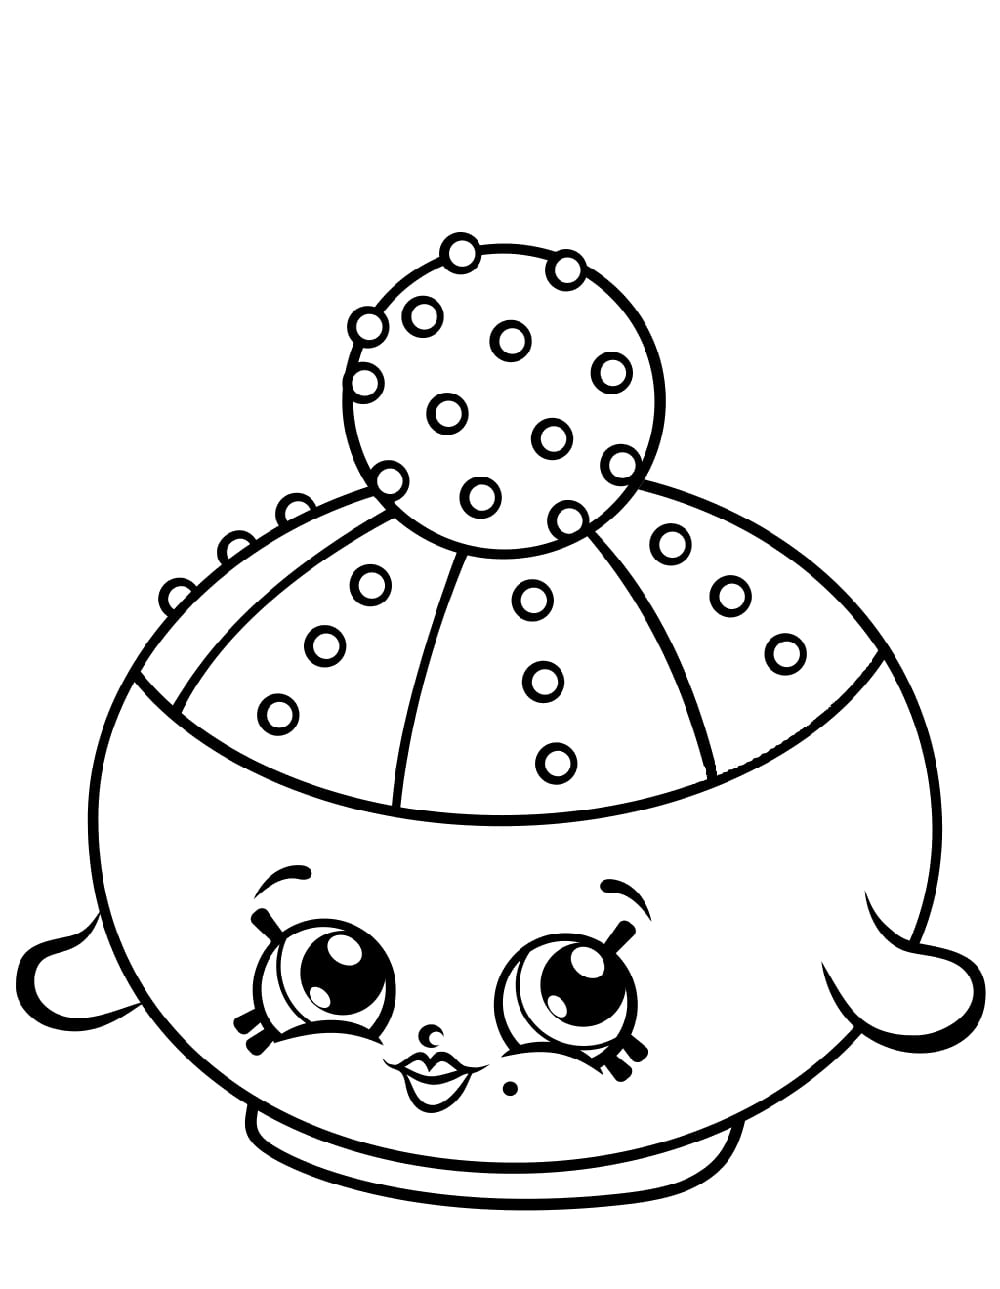 Shopkins Coloring Pages   Free Printable Coloring Pages for Kids